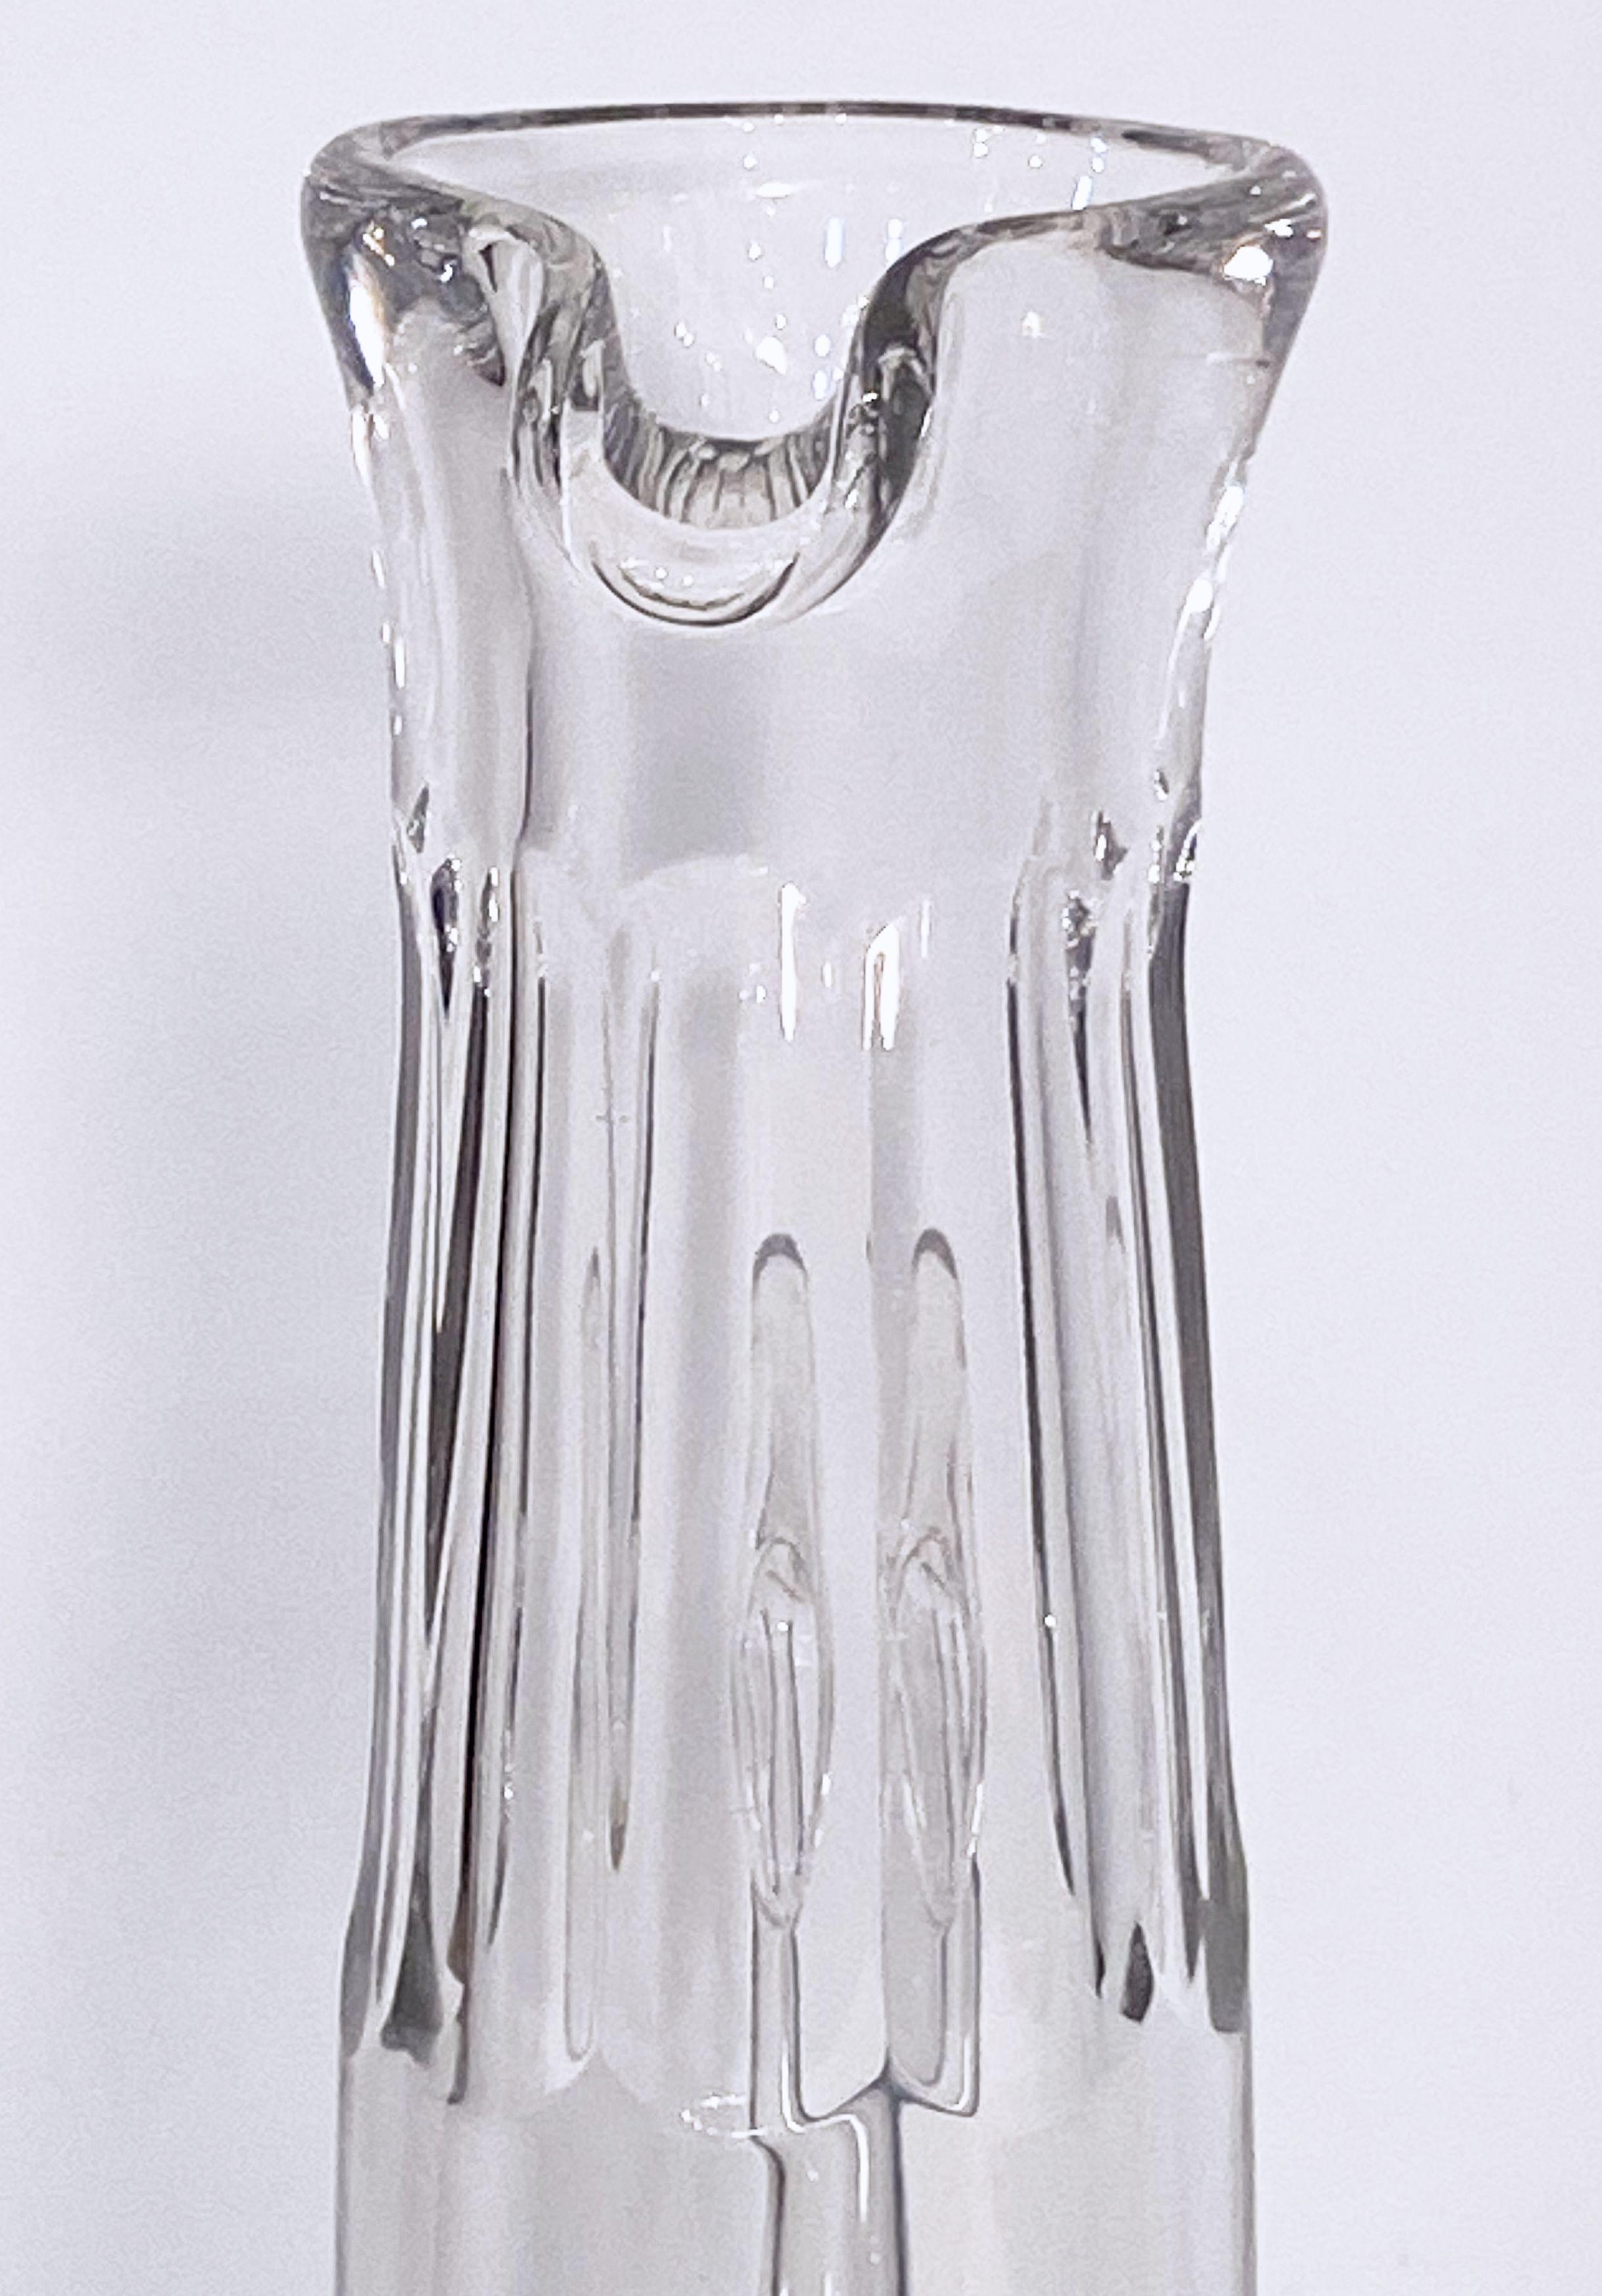 A fine vintage French champagne decanter of faceted crystal glass from the early 20th c., featuring a narrow neck designed to retain the bubbles.

The champagne decanter or jug hails from the mid 19th century when decanting champagne was